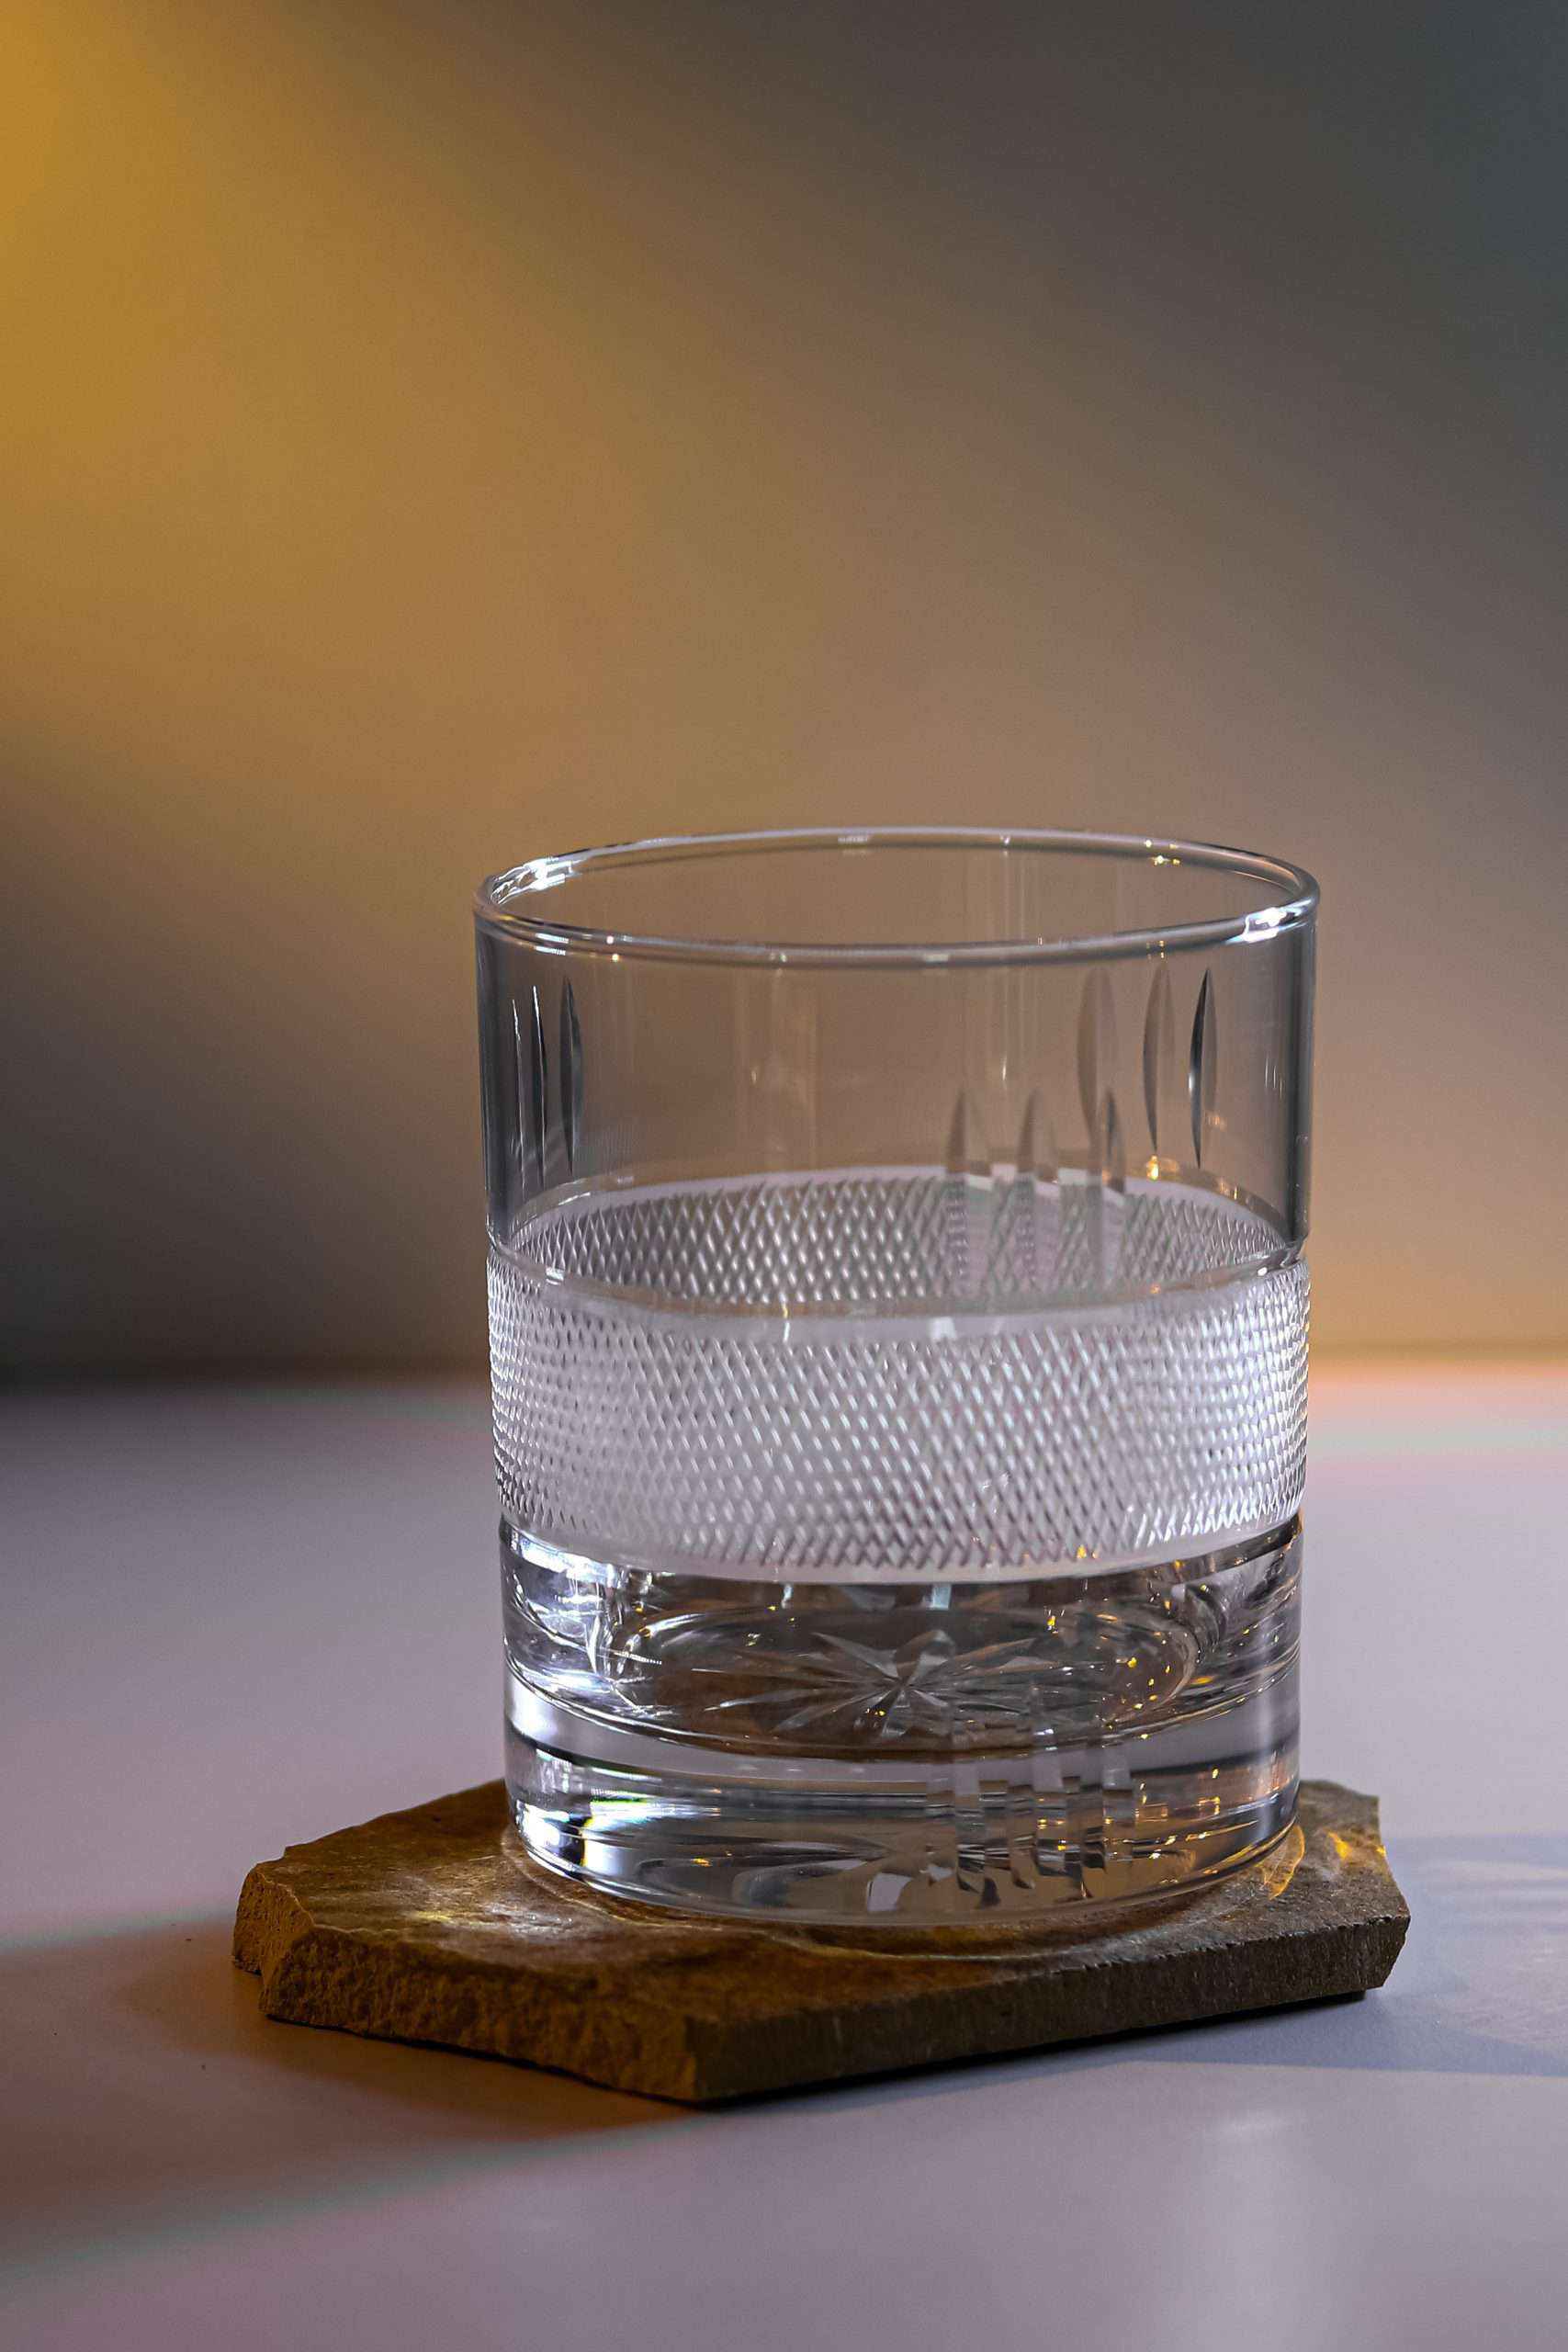 On the Edge Crystal Whiskey Glass